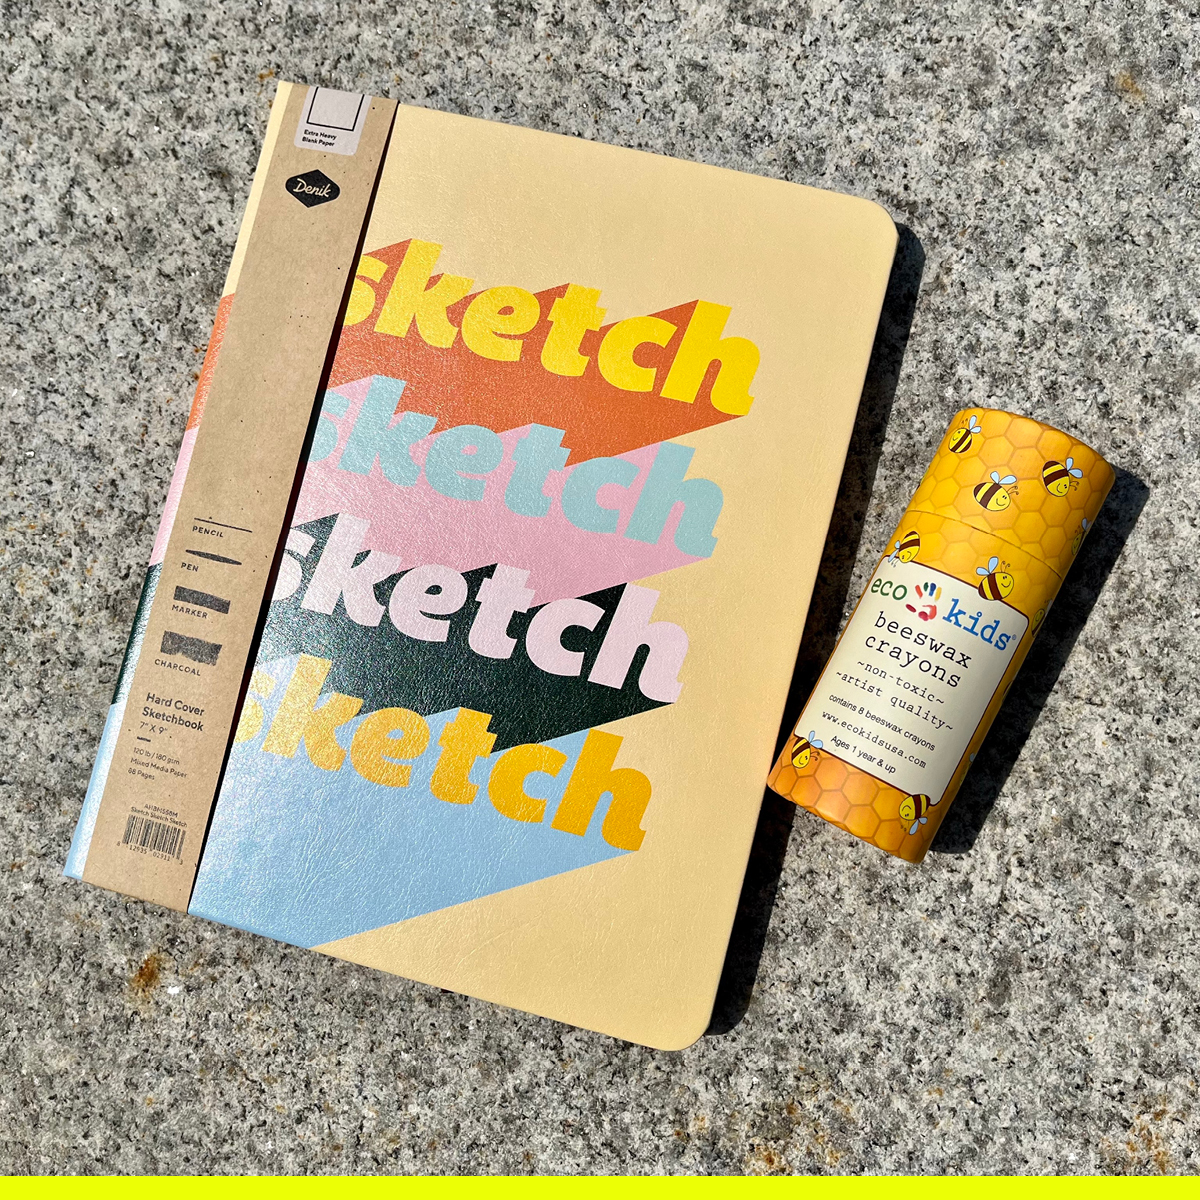 ✏️Get your creativity flowing by buying a sketch book from the #museumshop! Stop by and do some sketching this weekend #AtTheE!